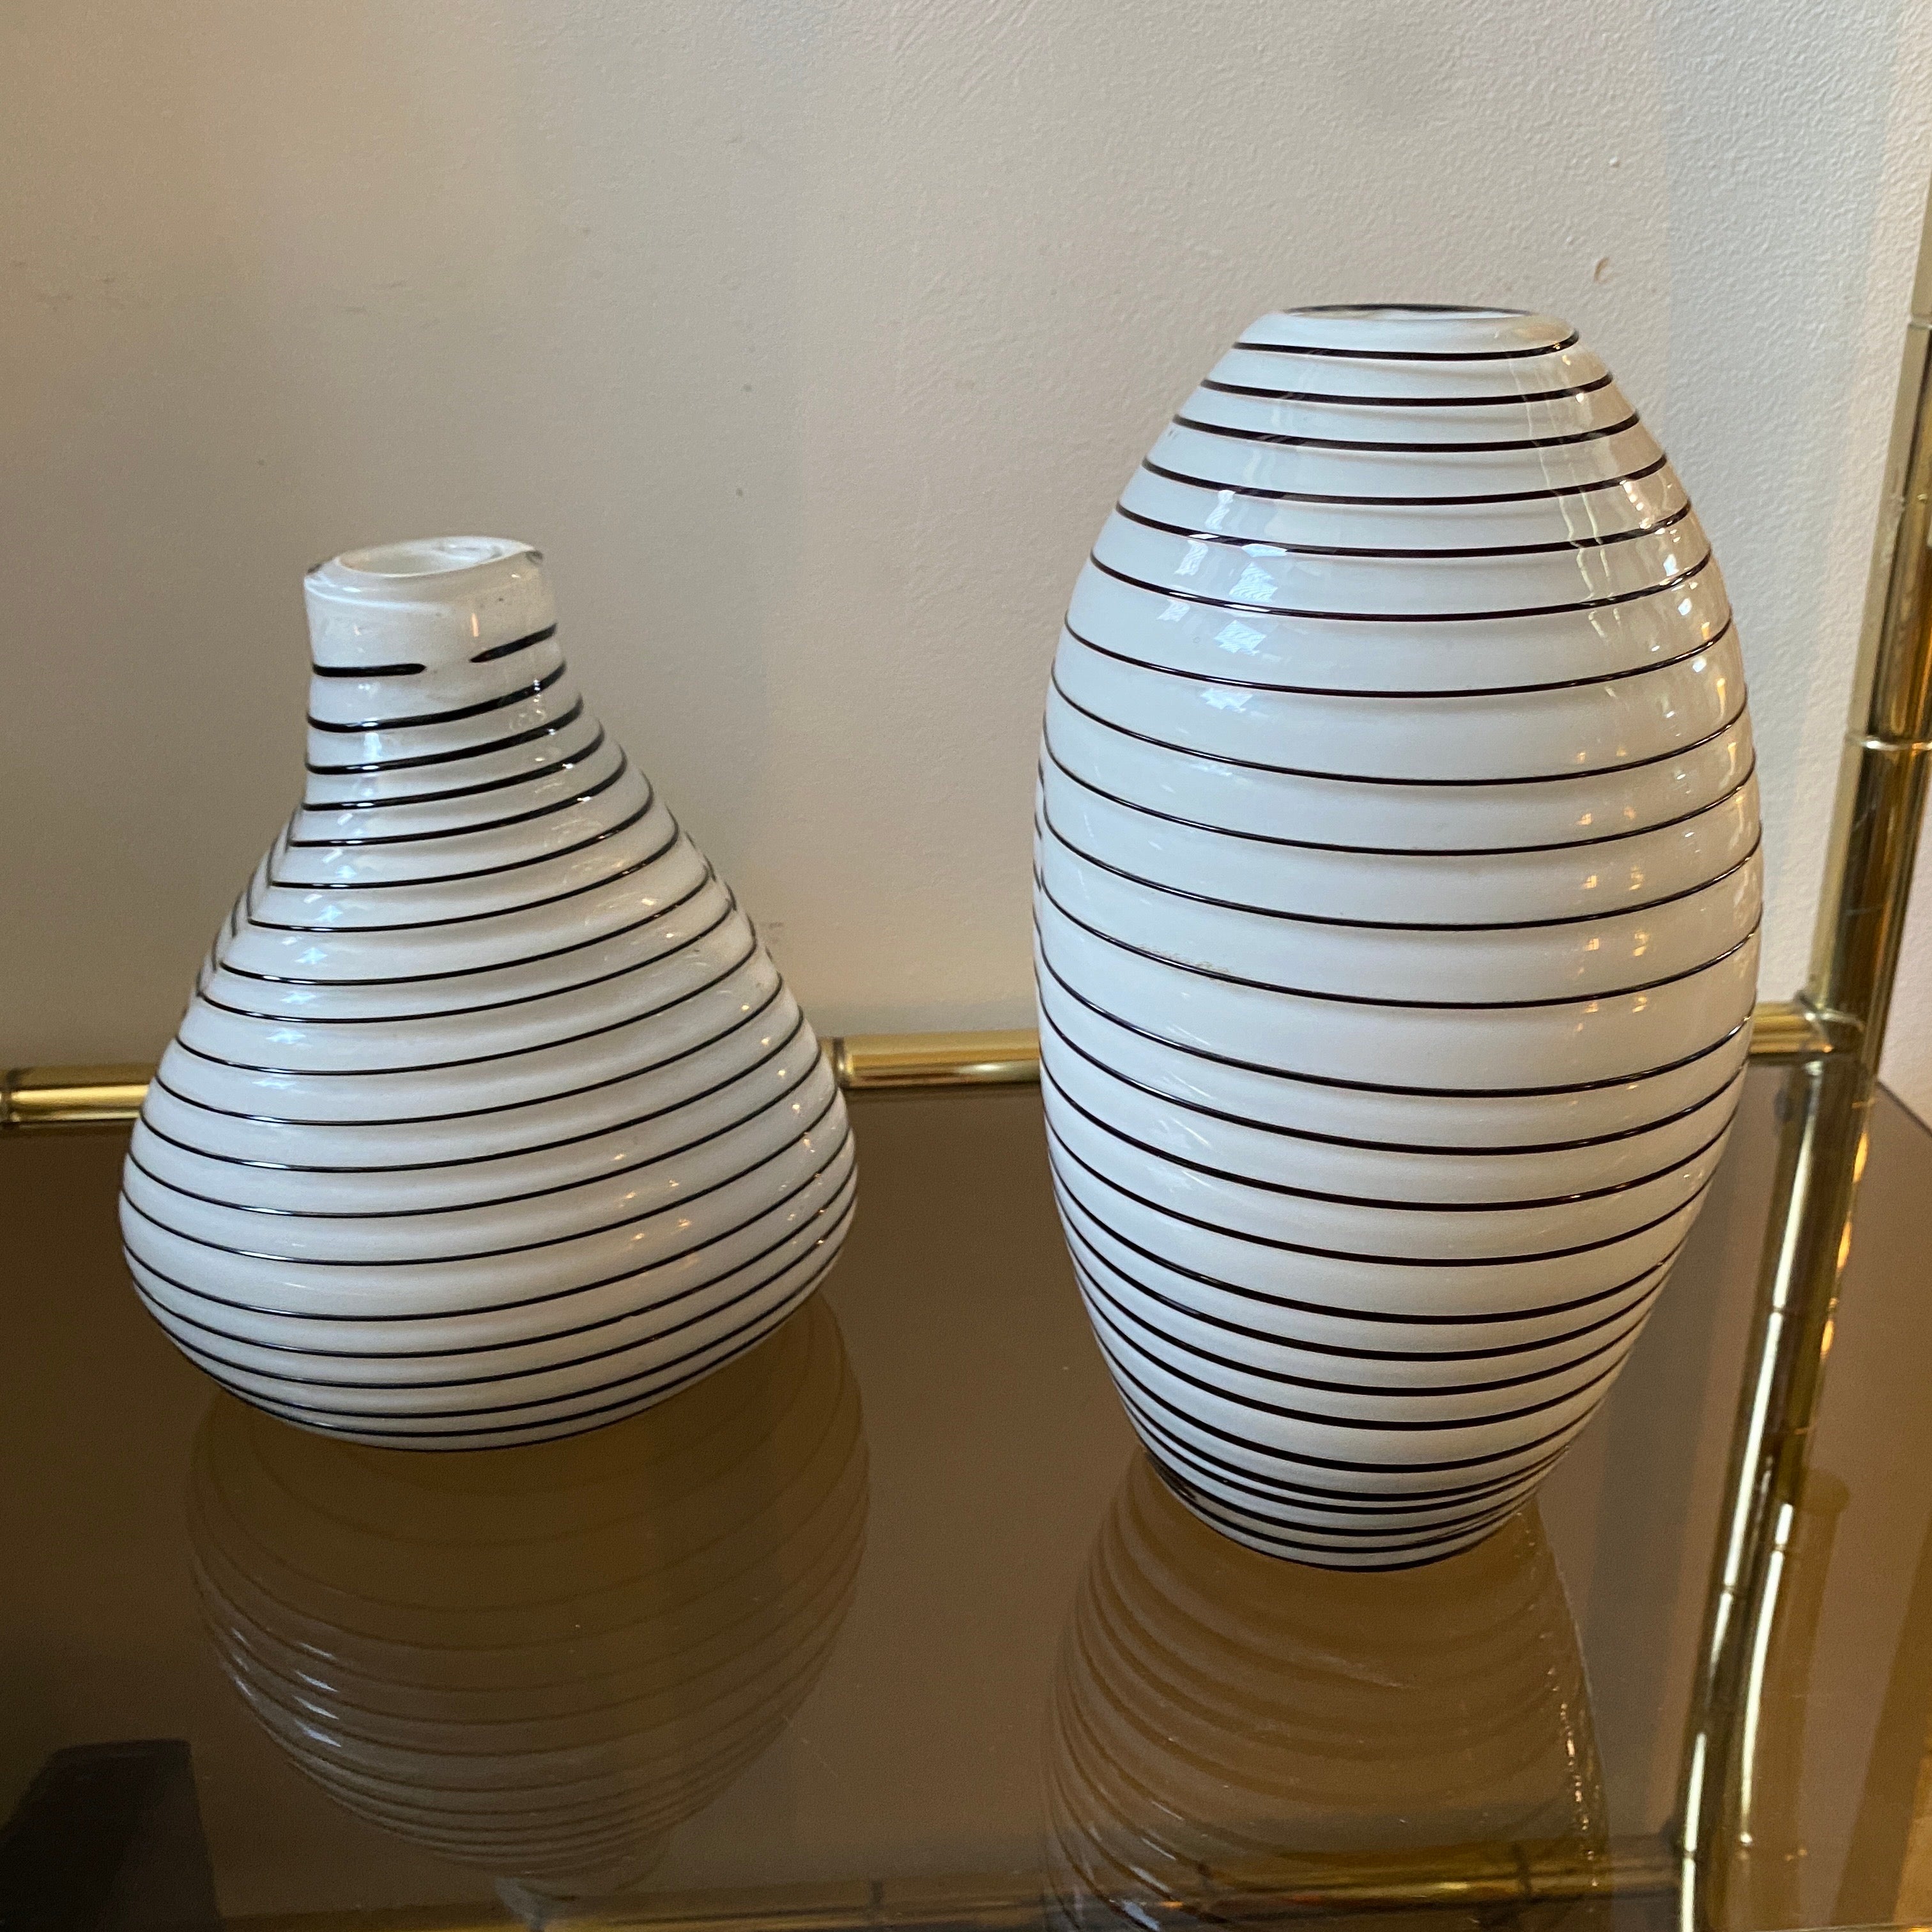 These Murano Glass Vases from the 1980s exhibit a unique combination of artistic flair, craftsmanship, and the distinctive Murano glass-making tradition. 
Dimension of the smallest vase are 19 cm in height and 16 cm in diameter, they are in very